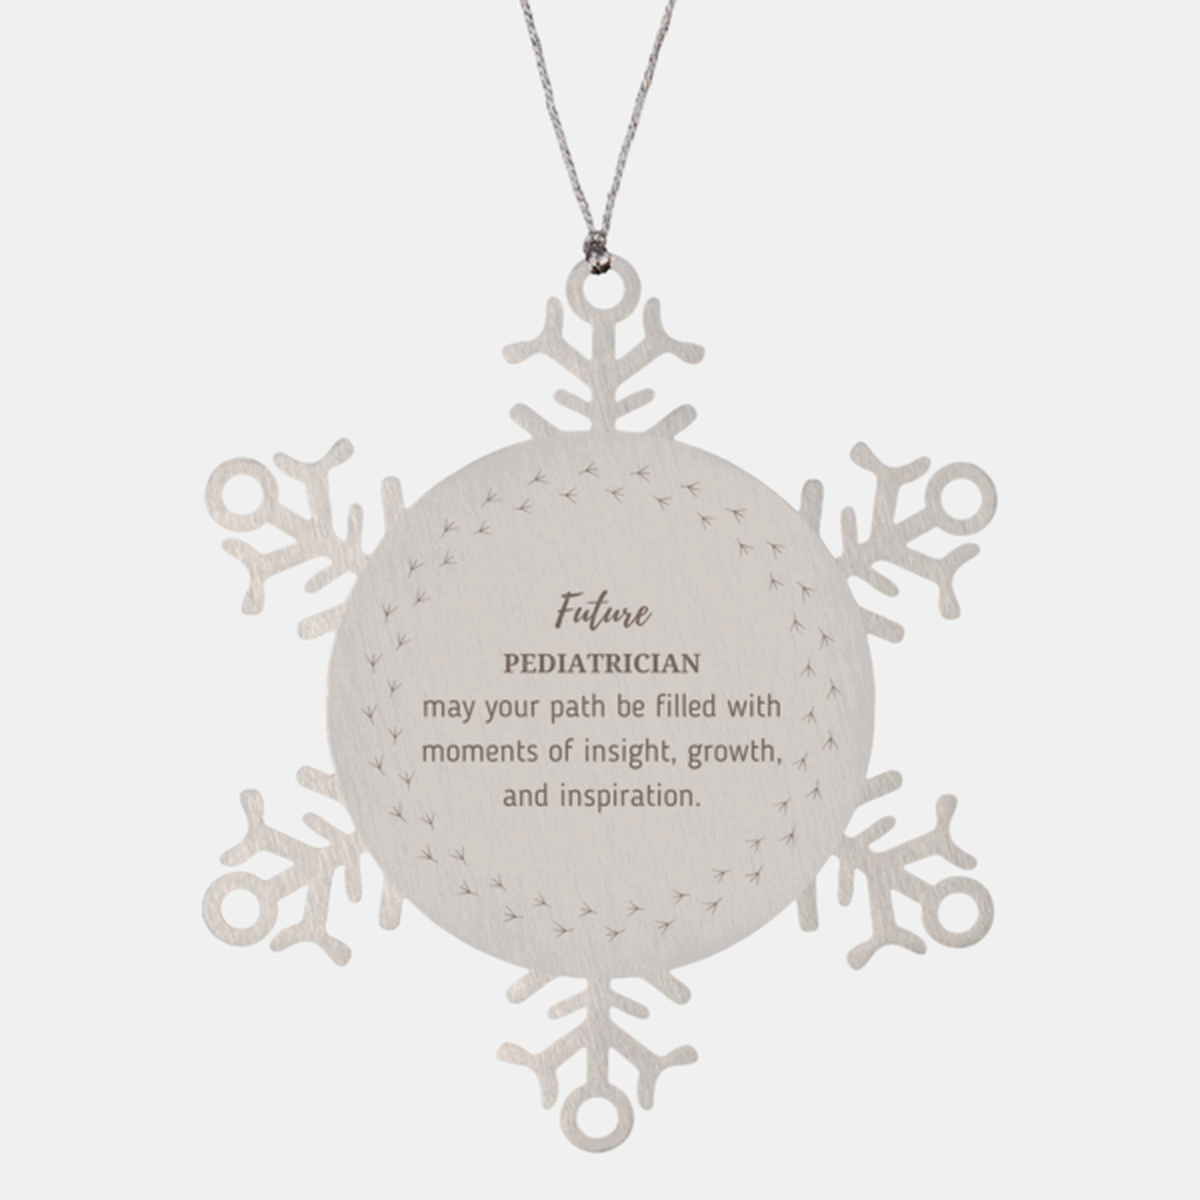 Future Pediatrician Gifts, May your path be filled with moments of insight, Graduation Gifts for New Pediatrician, Christmas Unique Snowflake Ornament For Men, Women, Friends